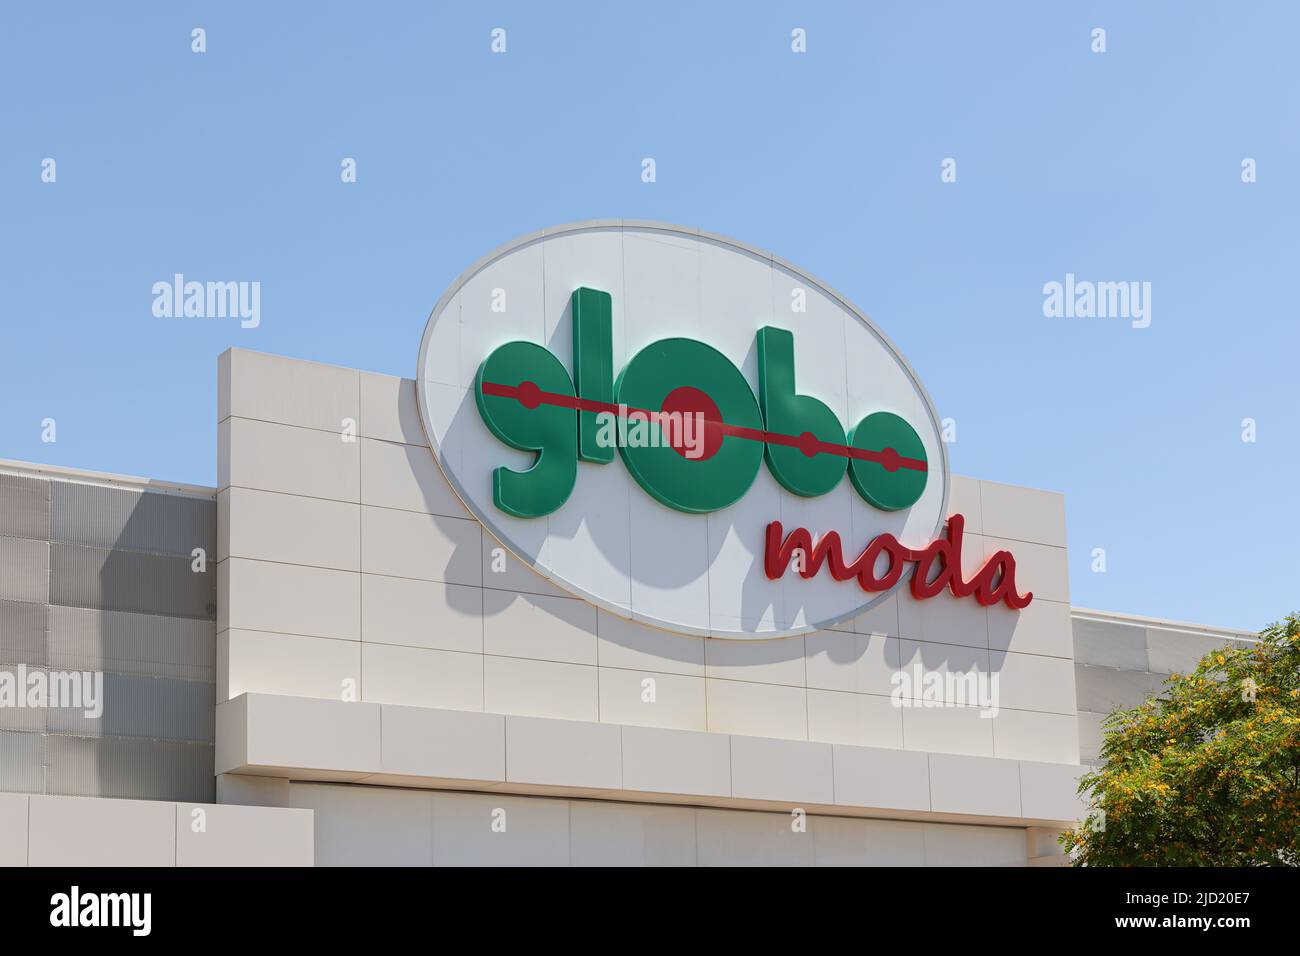 ALFAFAR, SPAIN - JUNE 06, 2022: Globomoda is an Italian company specialized in clothing and footwear Stock Photo